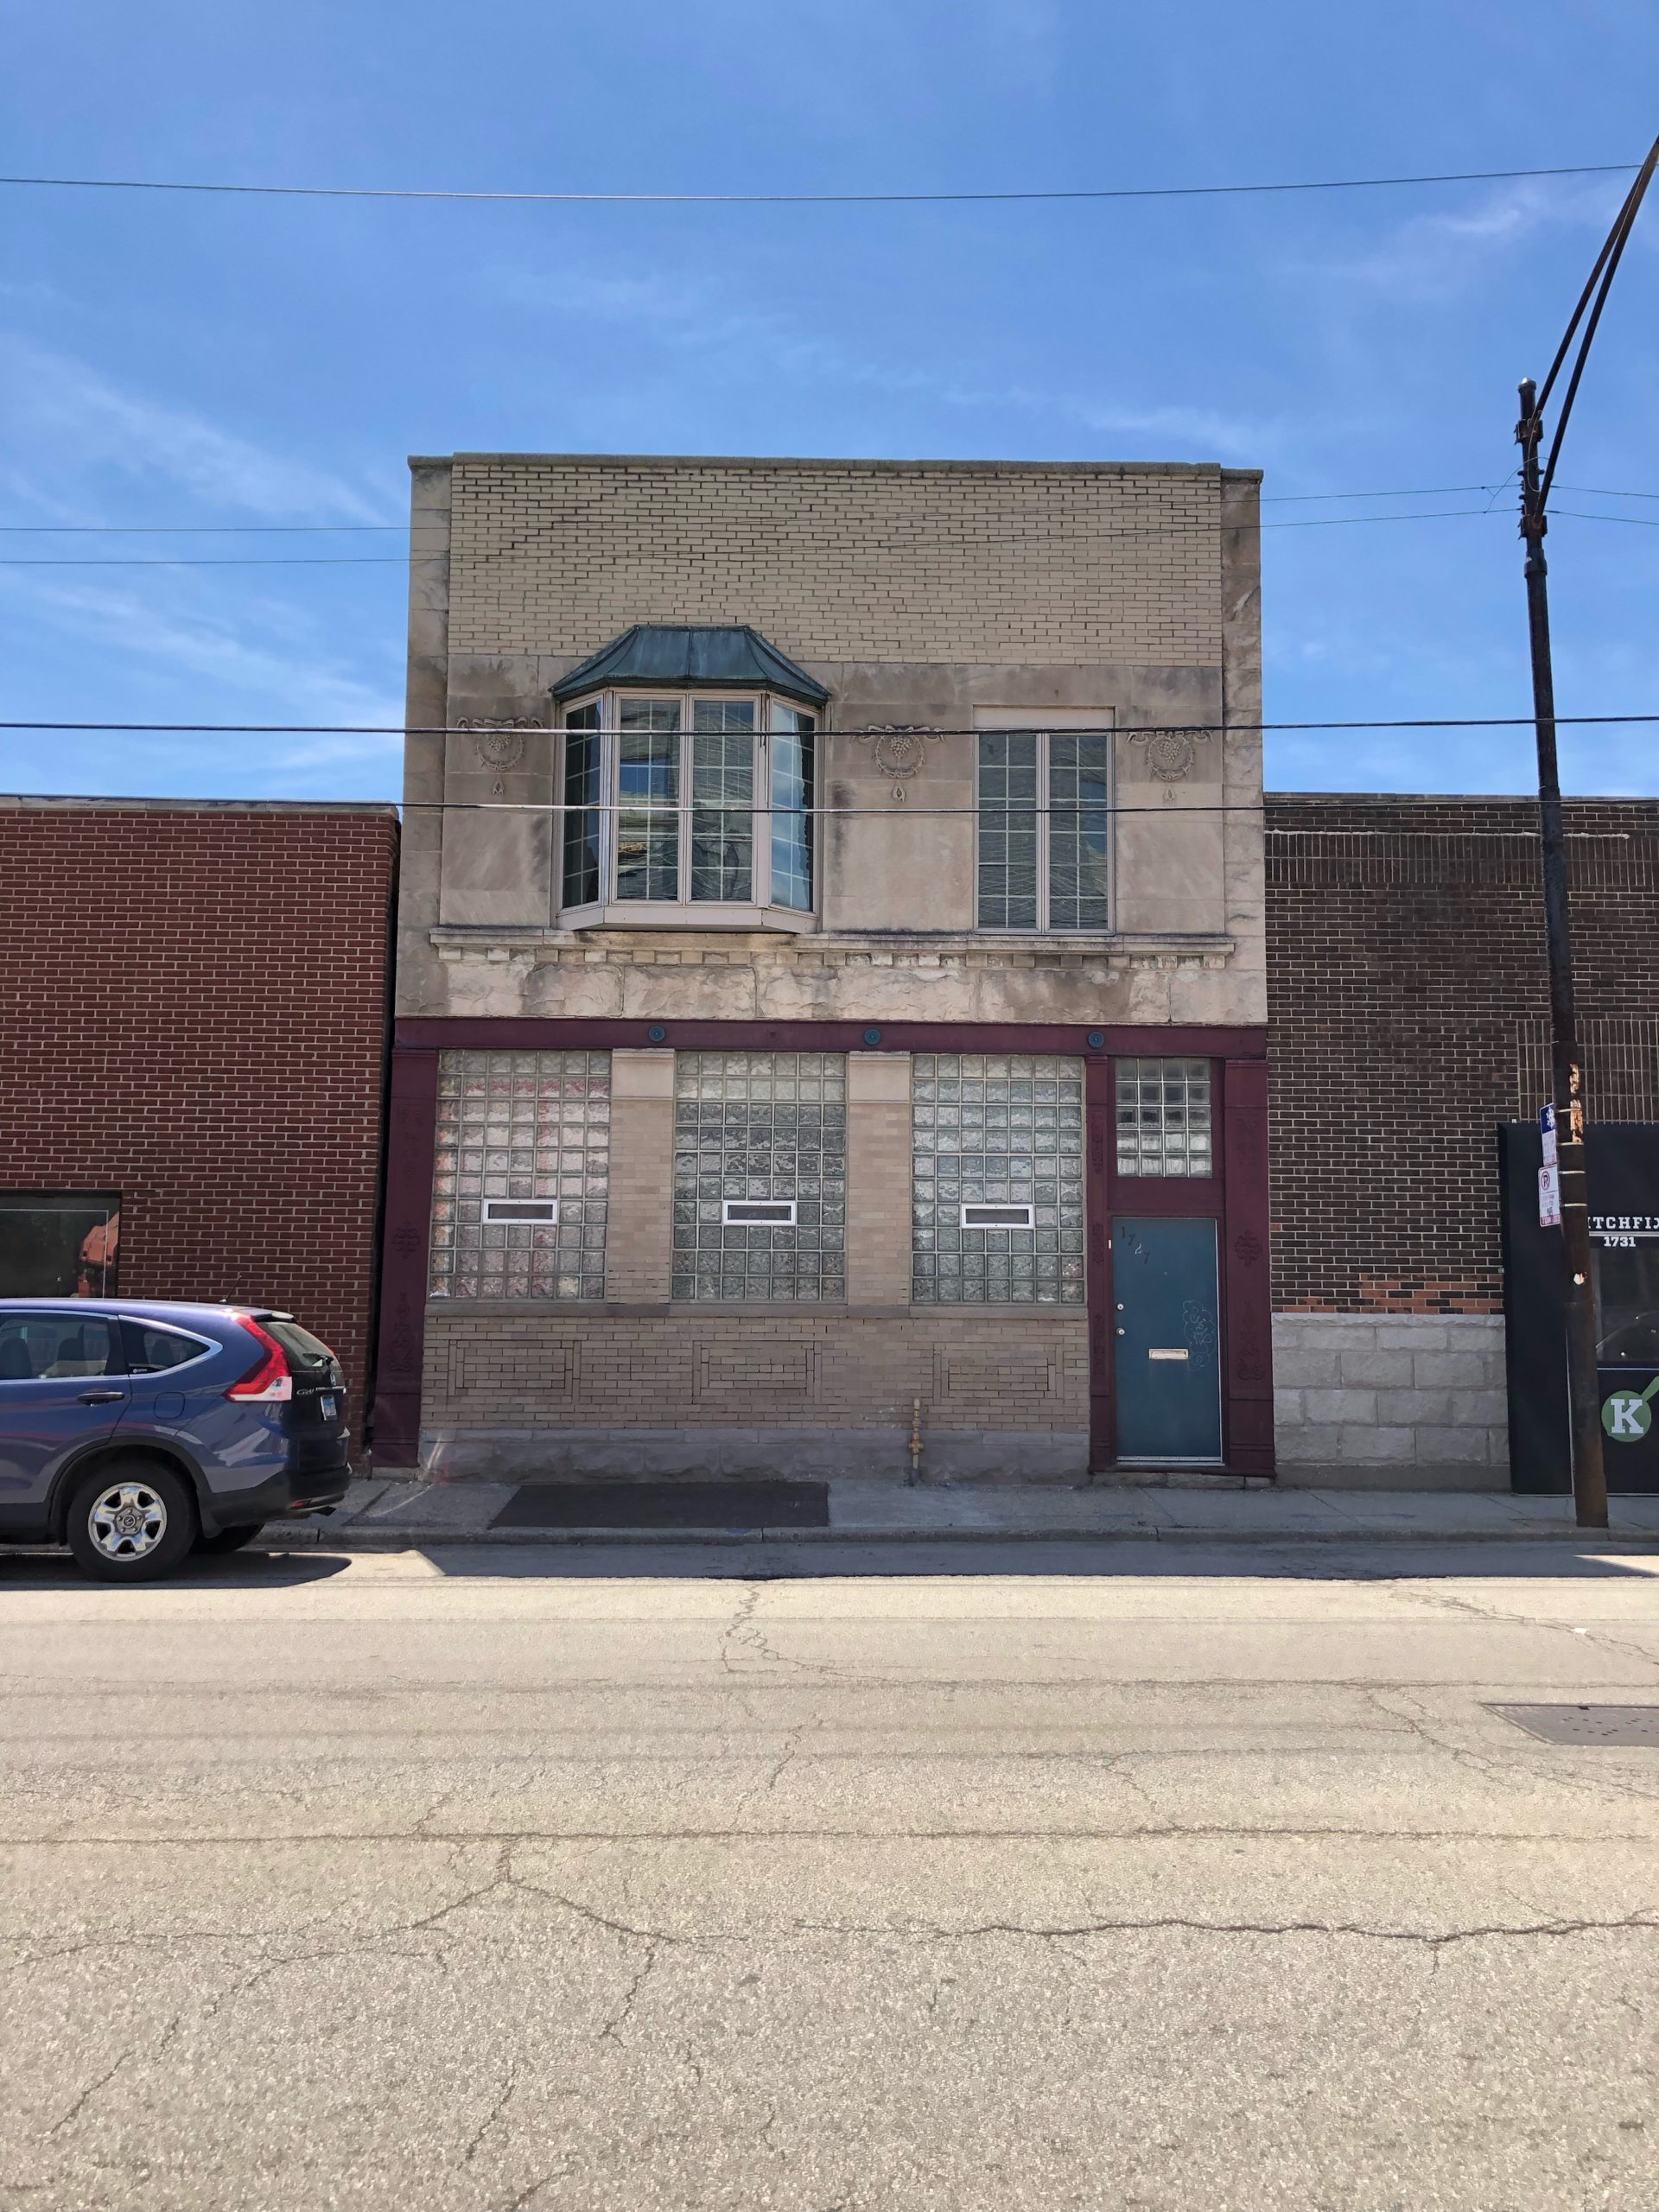 Two story stone and brick building - Cawley Commercial Real Estate